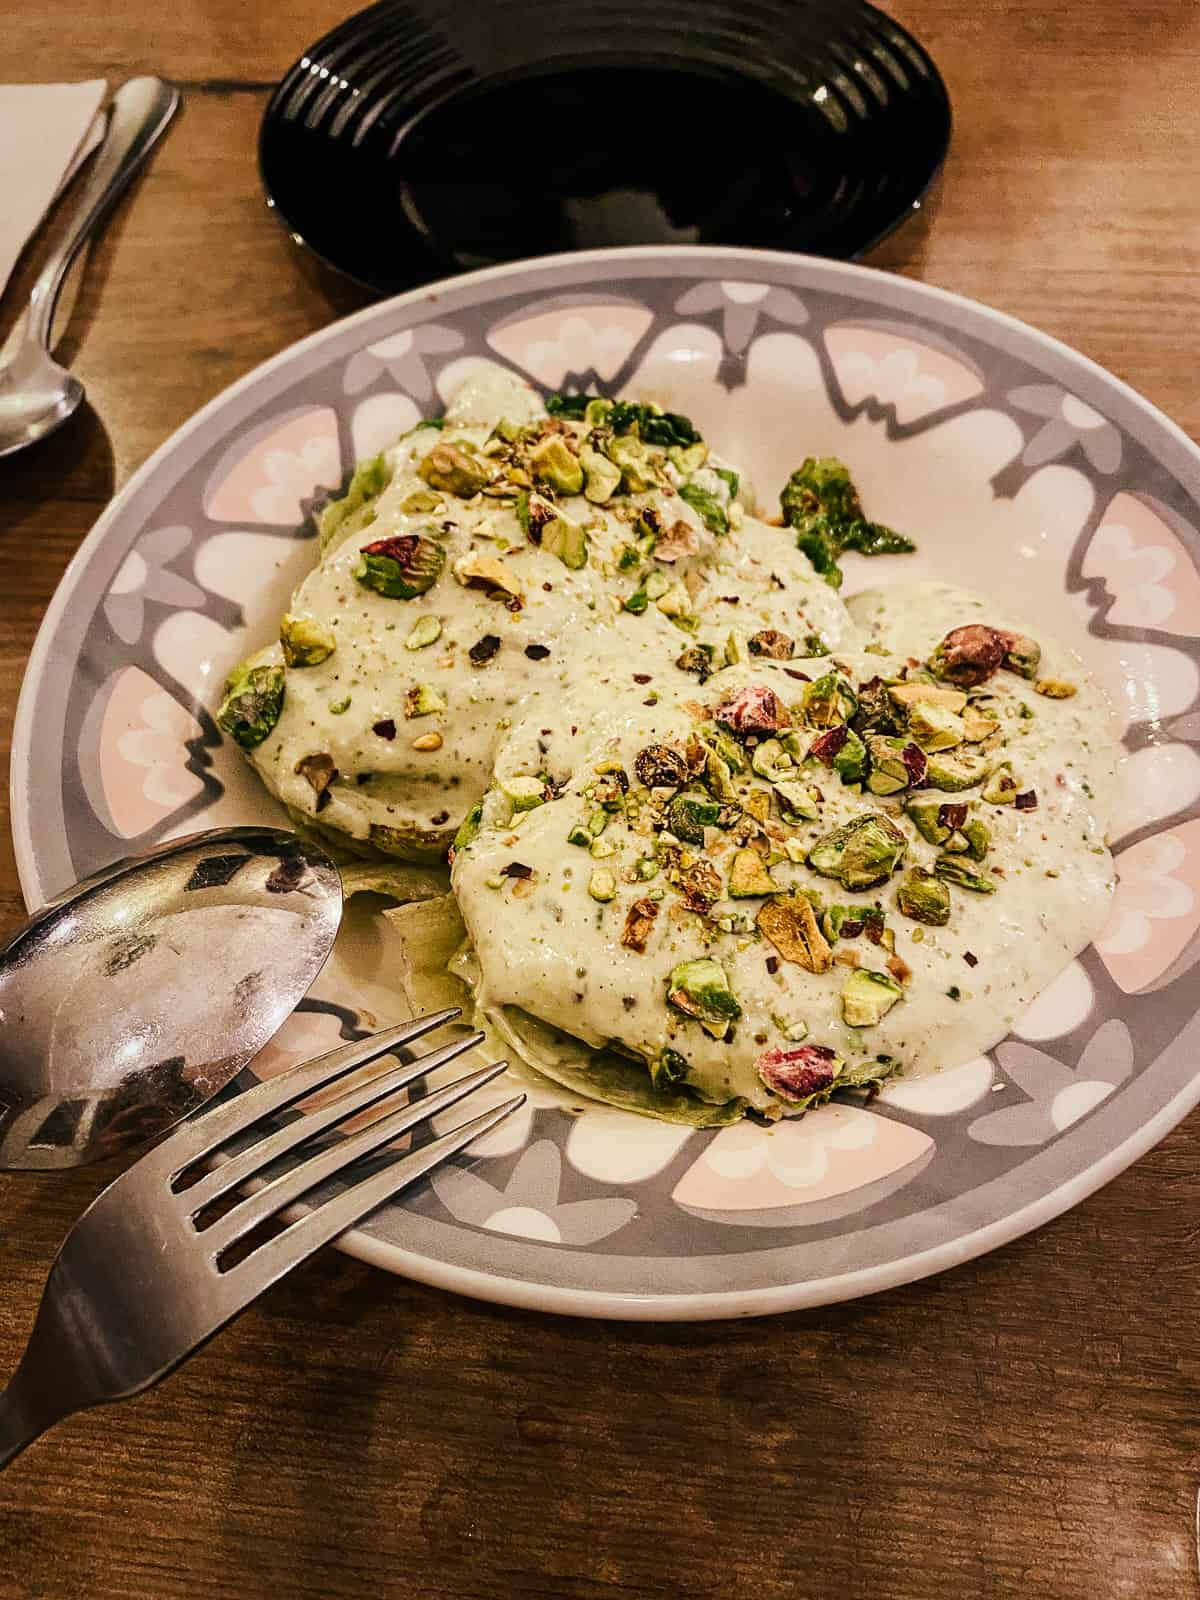 A plate of grilled lettuce garnished with green pistachios, served on a patterned plate, representing a refined and delicious tapa.